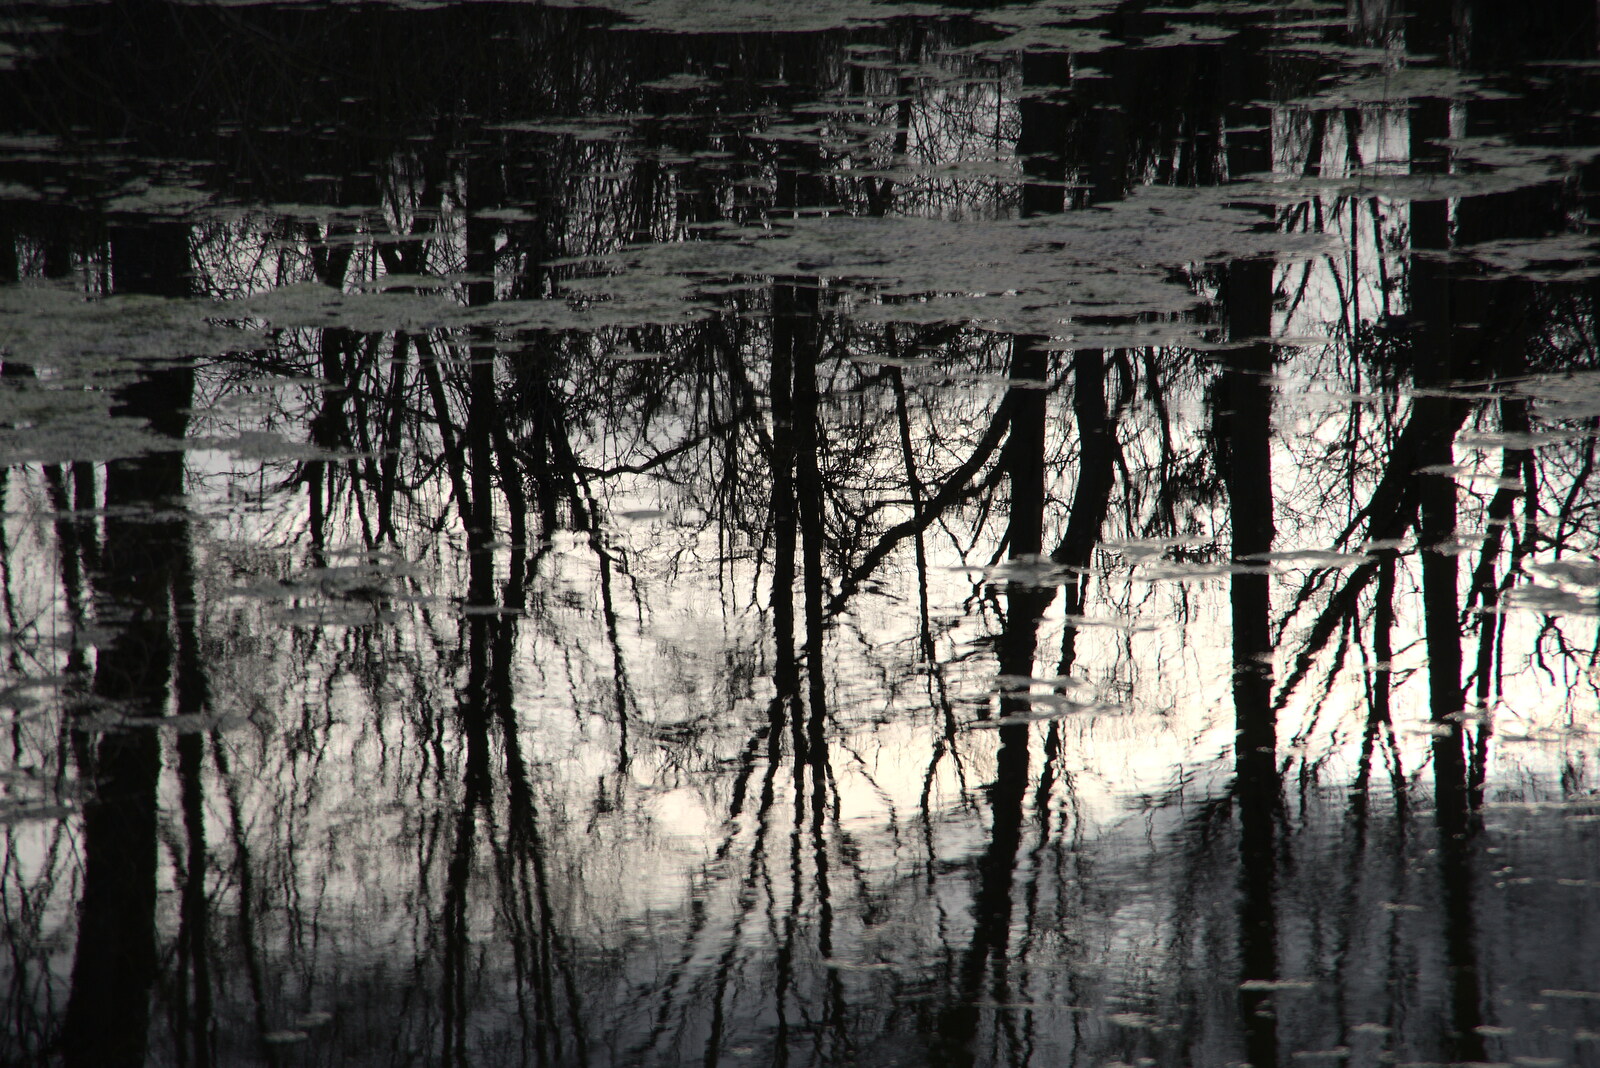 Trees are reflected in the new pond from The Oaksmere: 28 Weeks Later, Brome, Suffolk - 21st March 2021